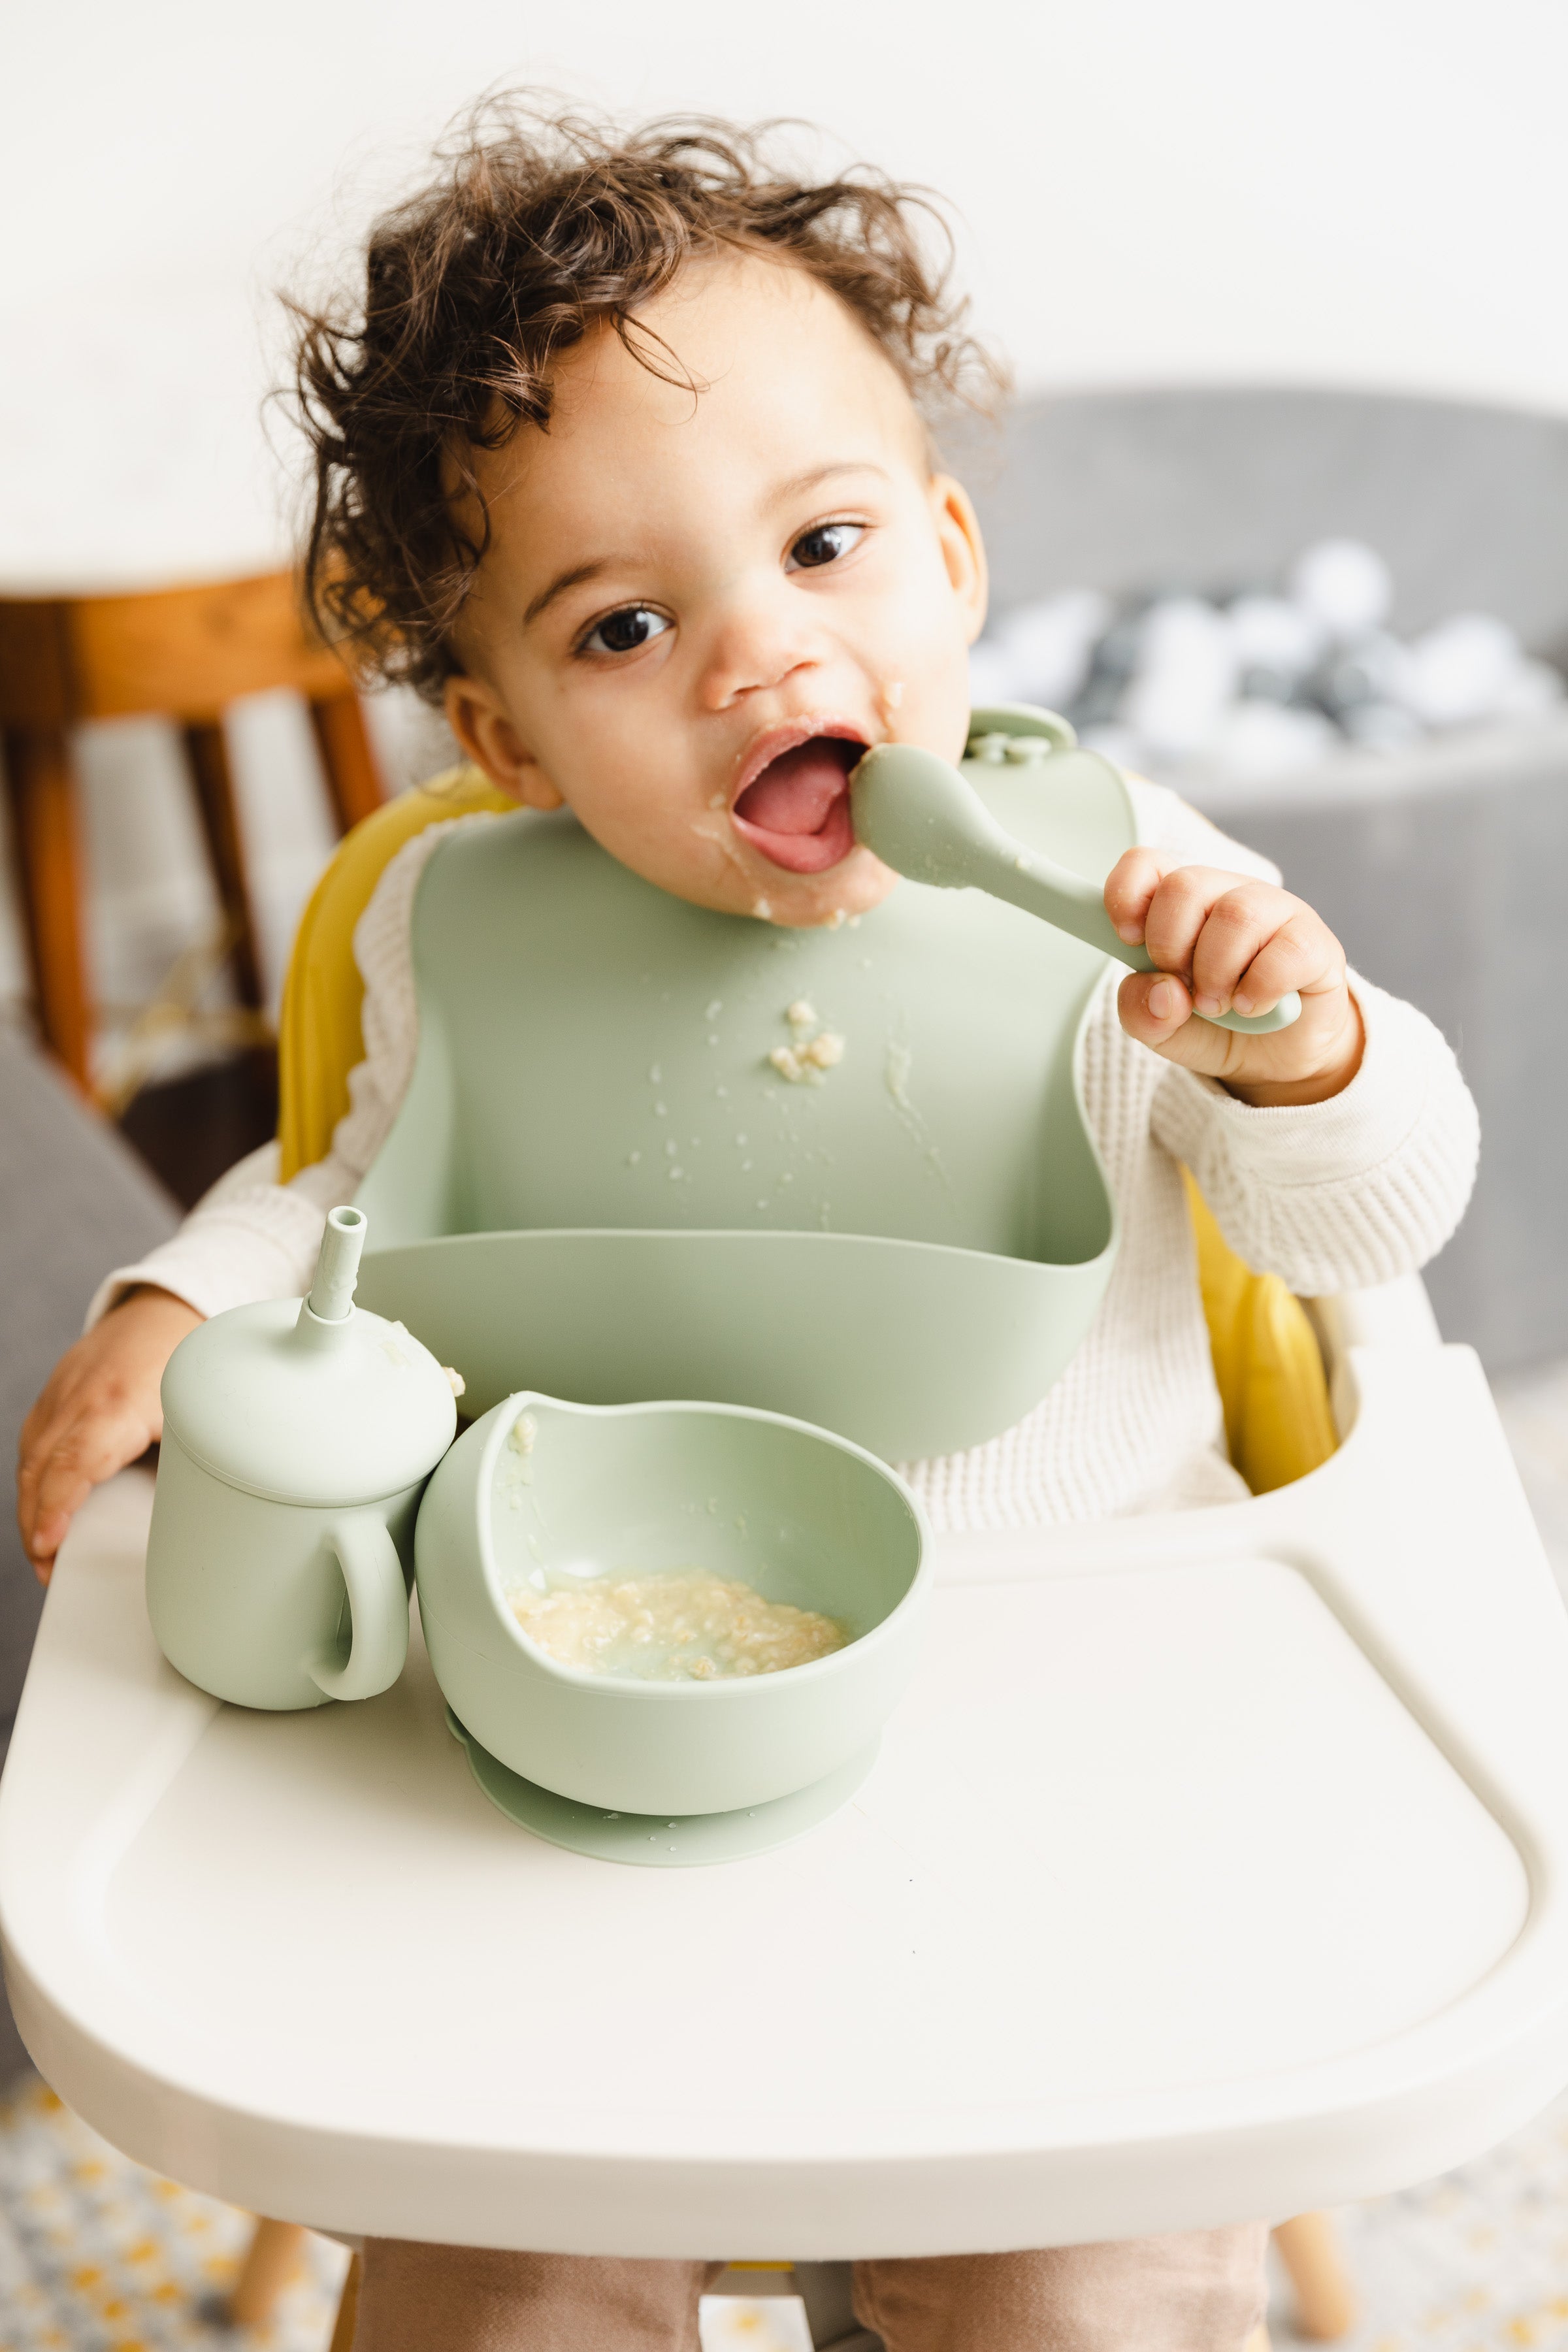 Best Food for Babies: Superfoods for Infants and Toddlers